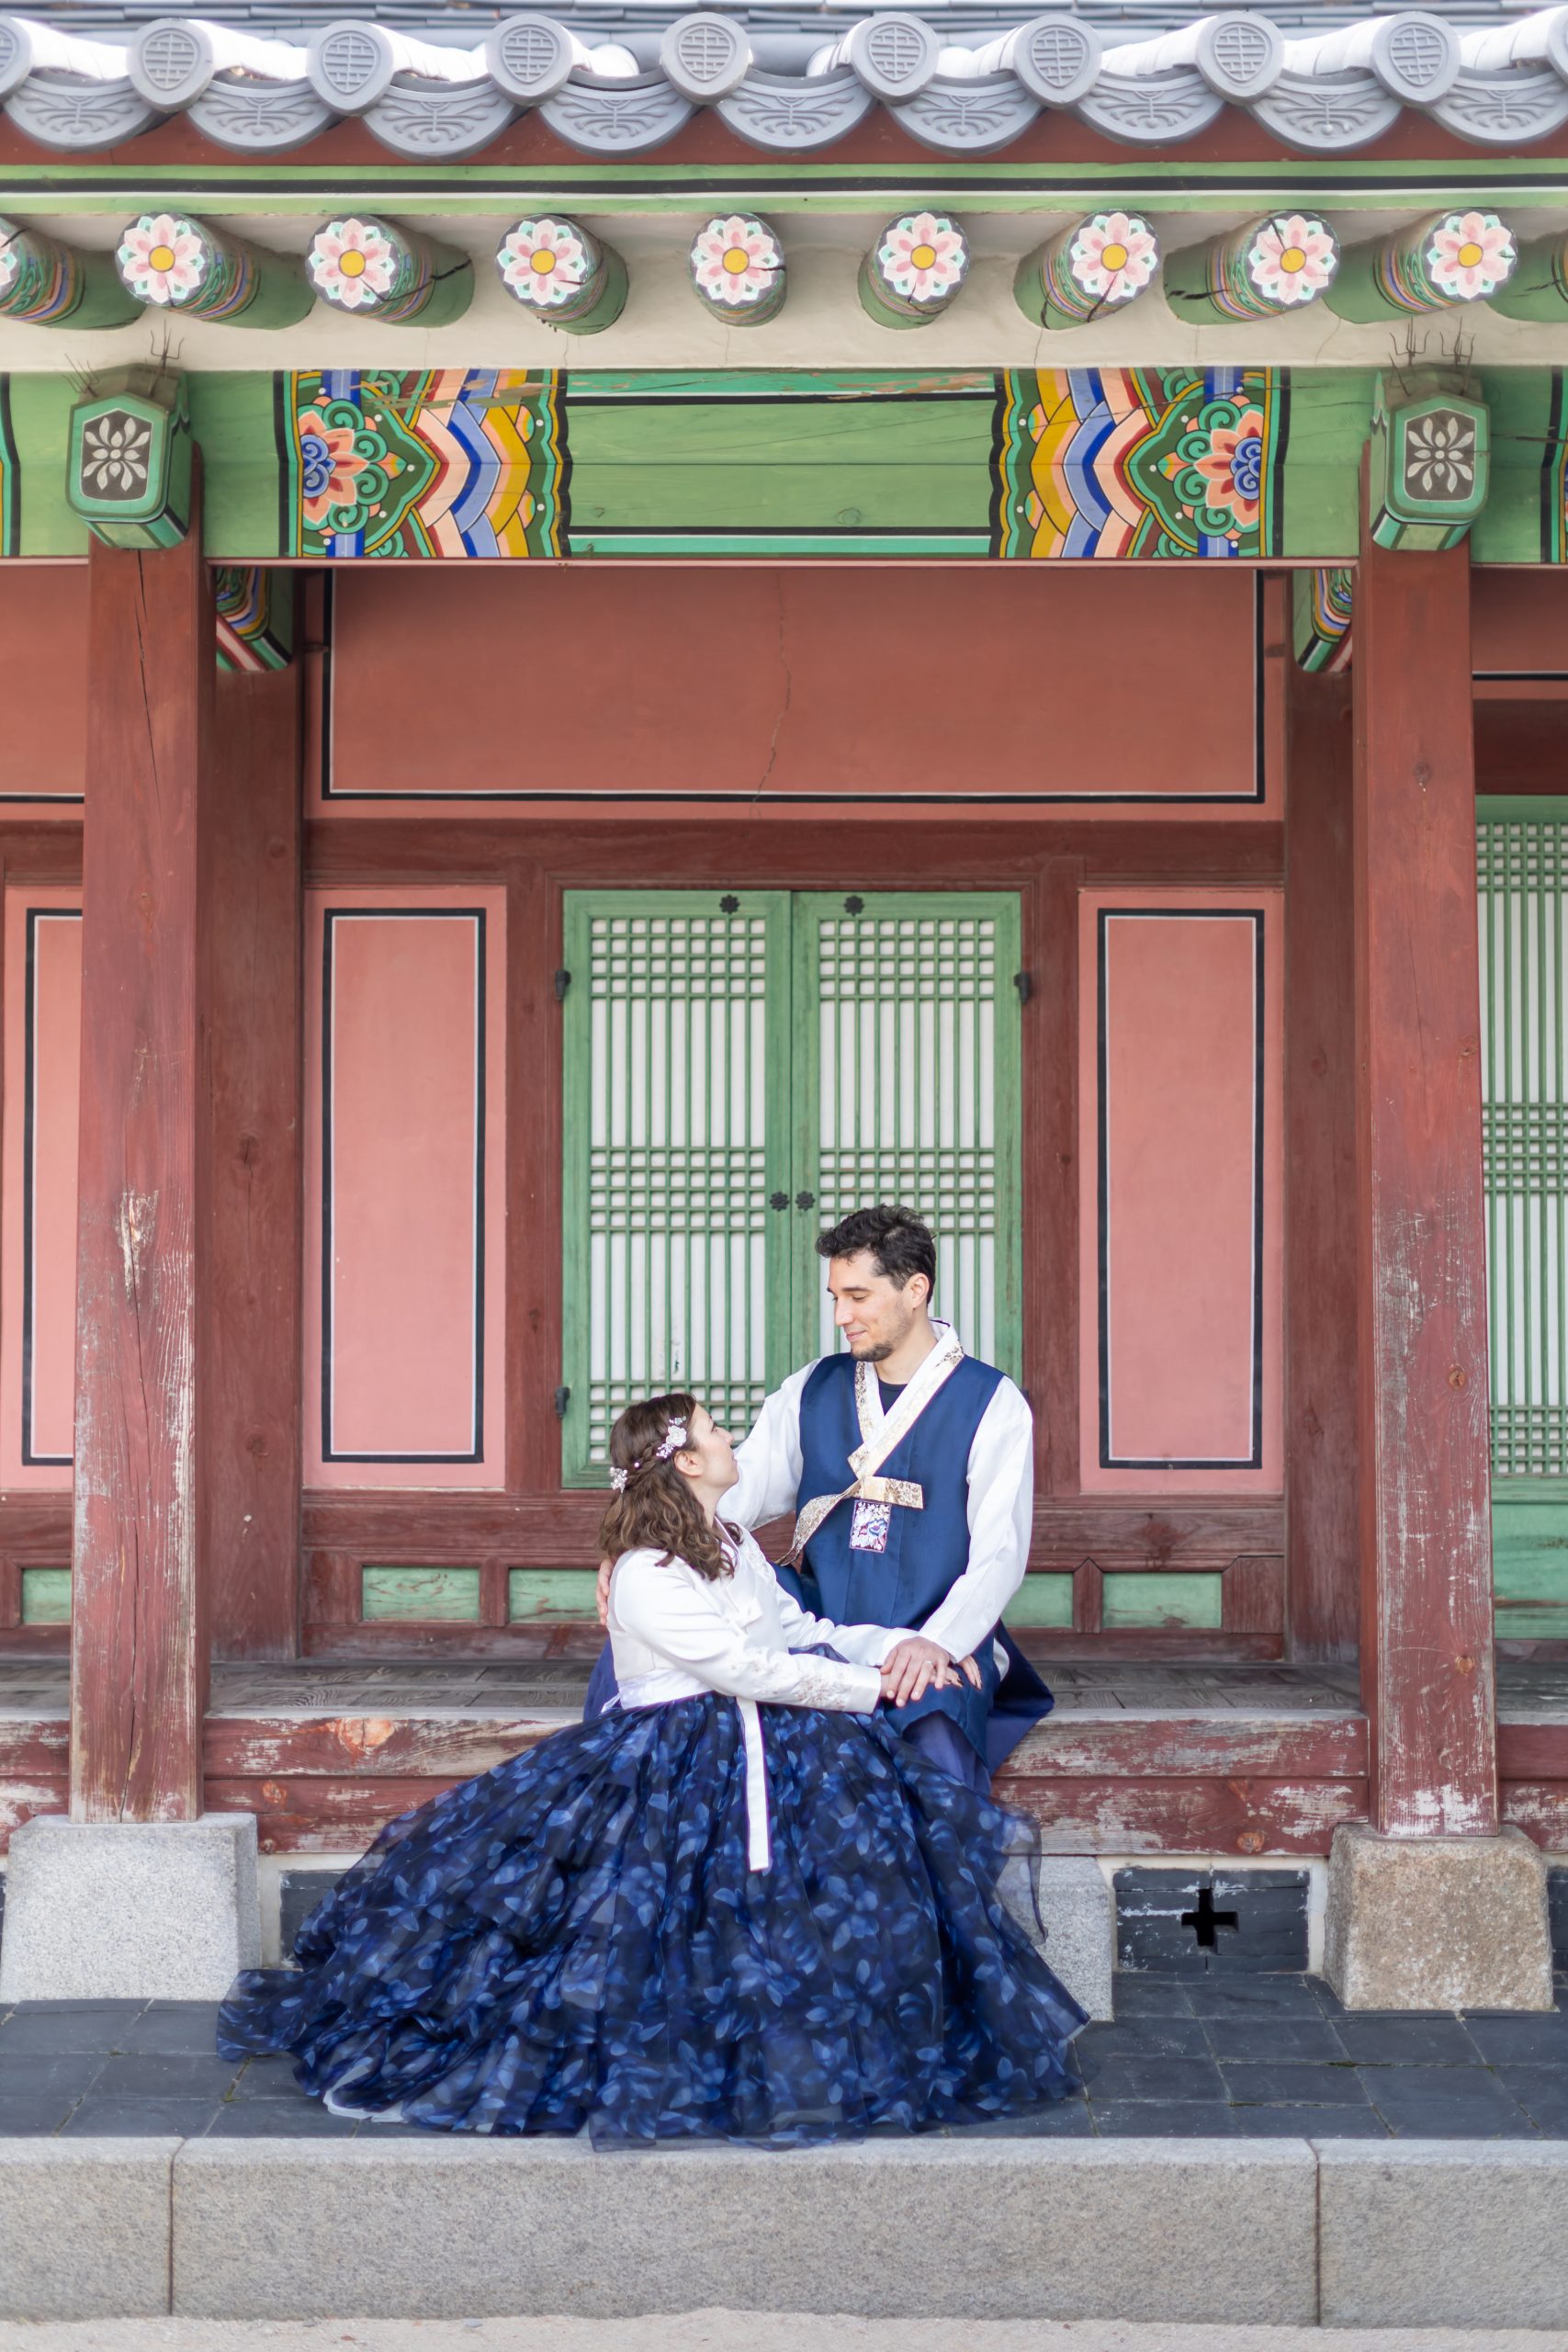 Cory and G from You Could Travel dressed in Hanbok Korean traditional dress